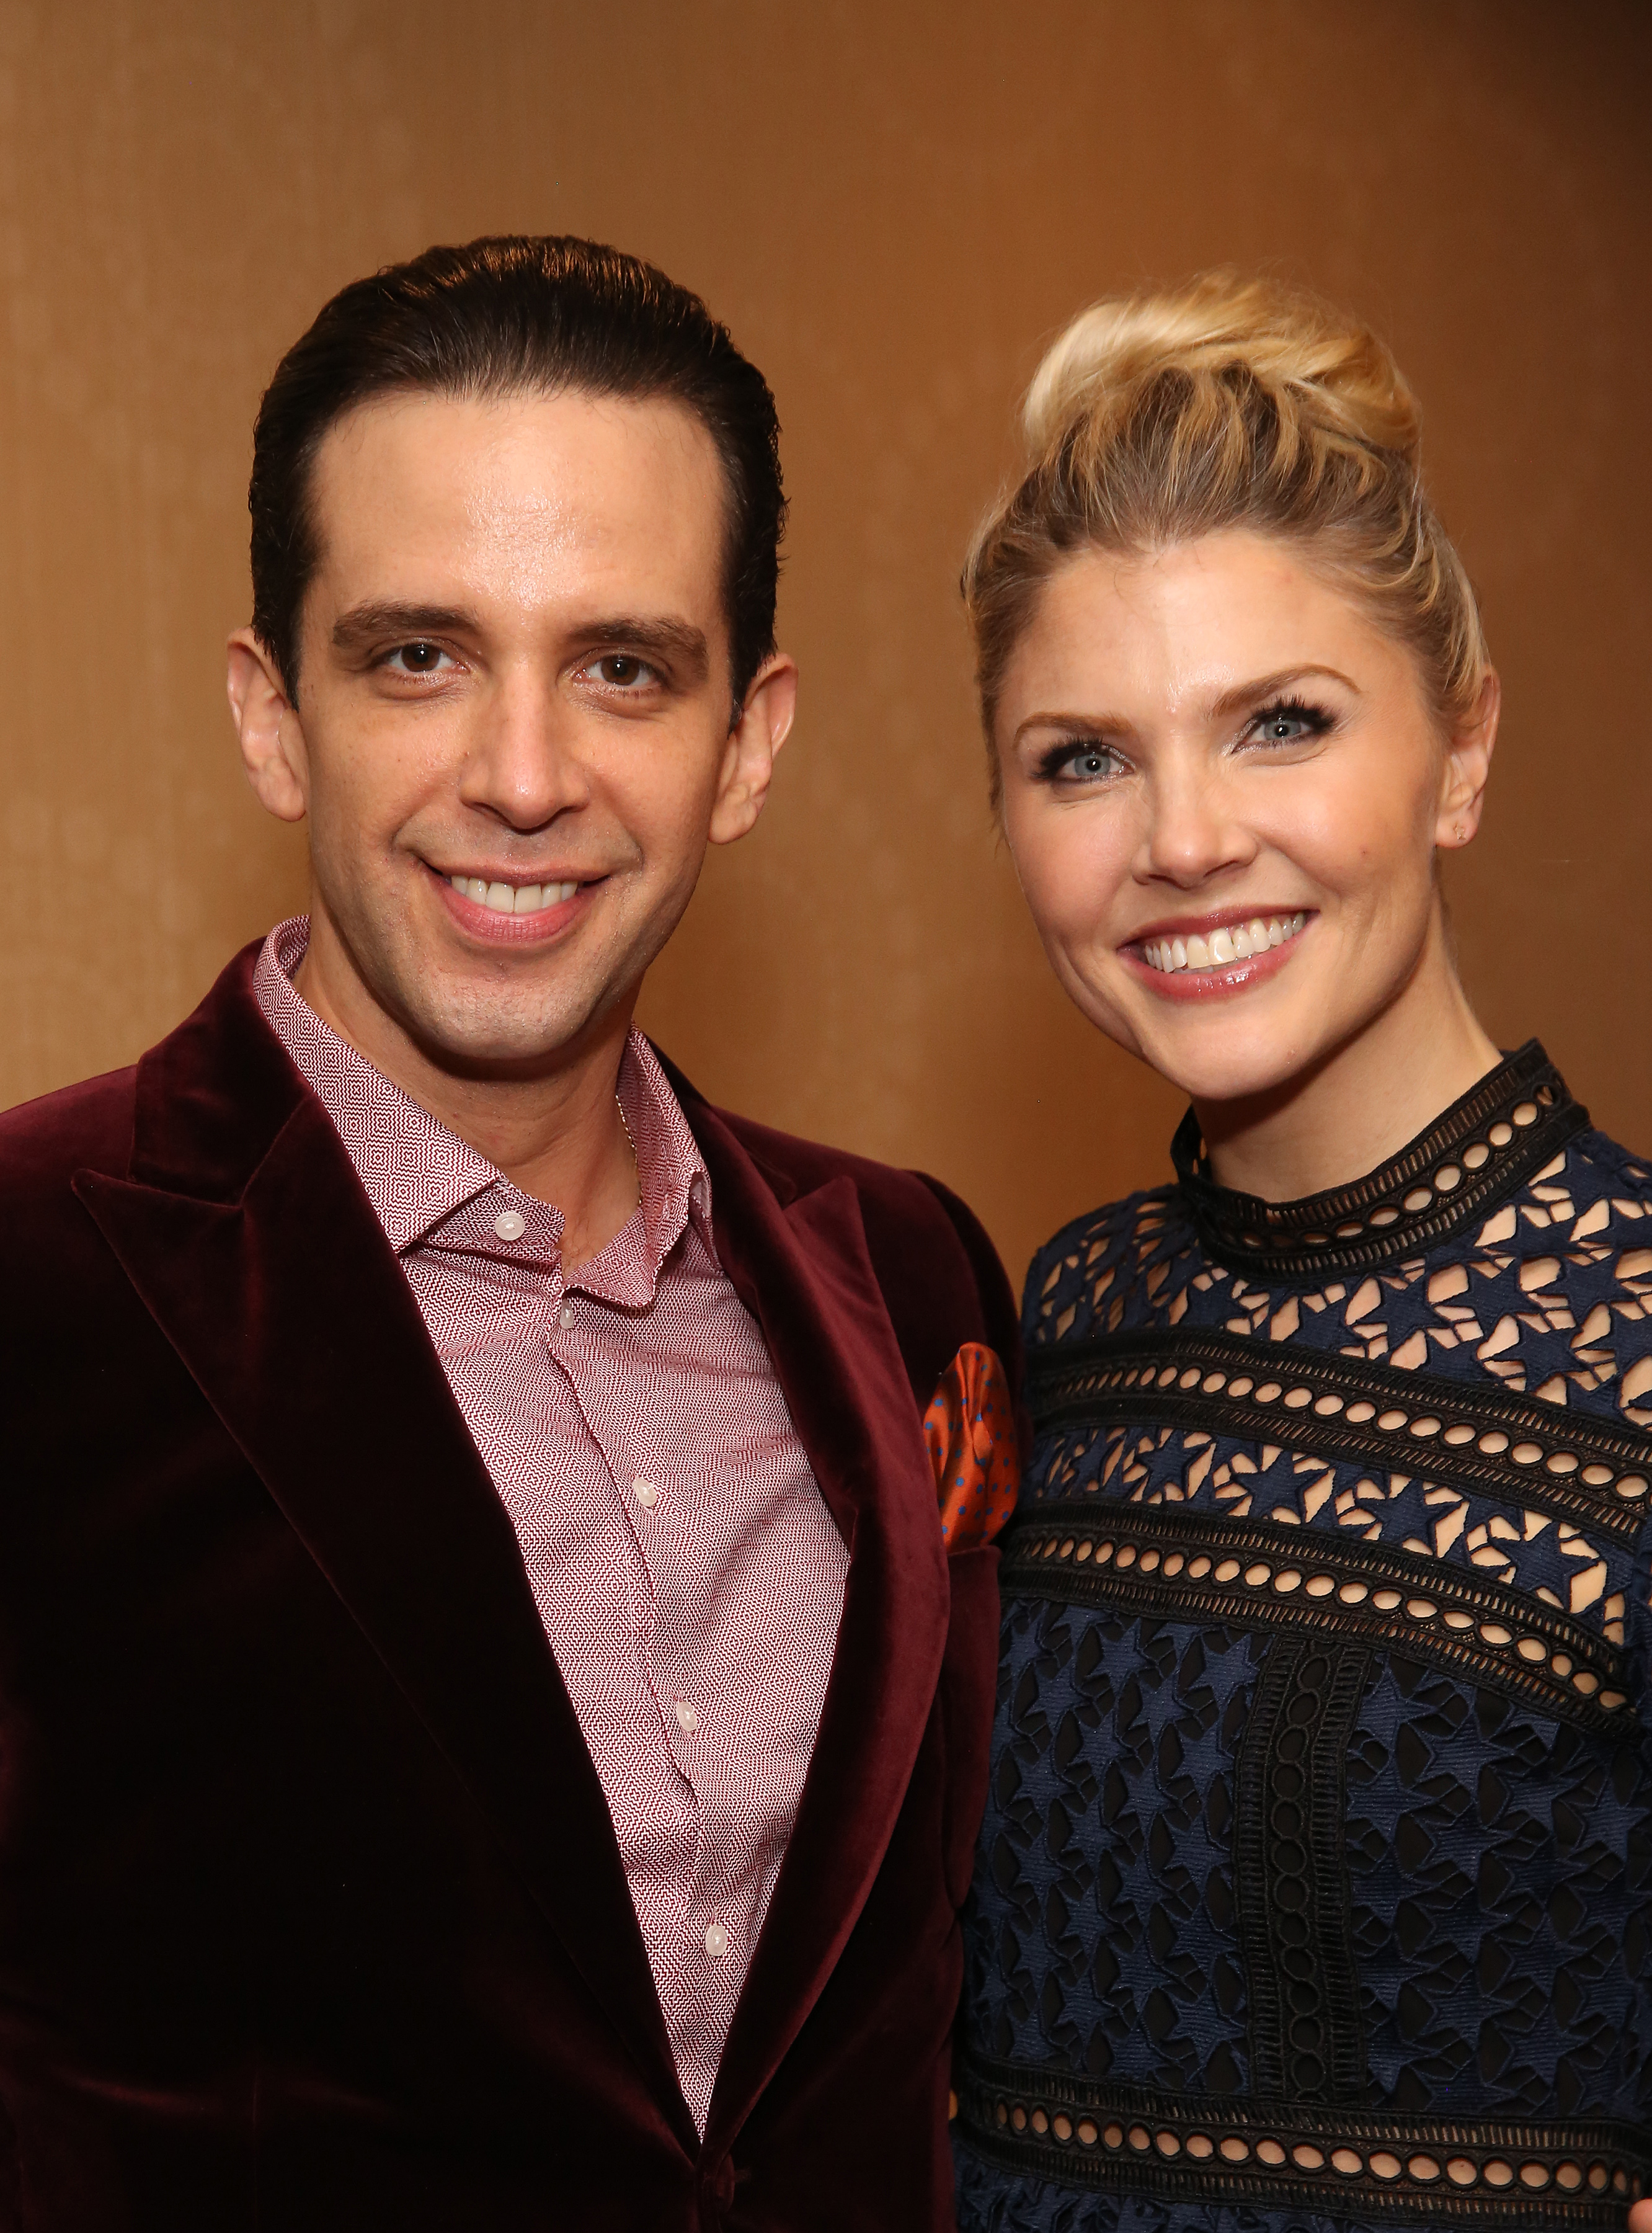 Amanda Kloots and Nick Cordero at a Broadway show in 2016.